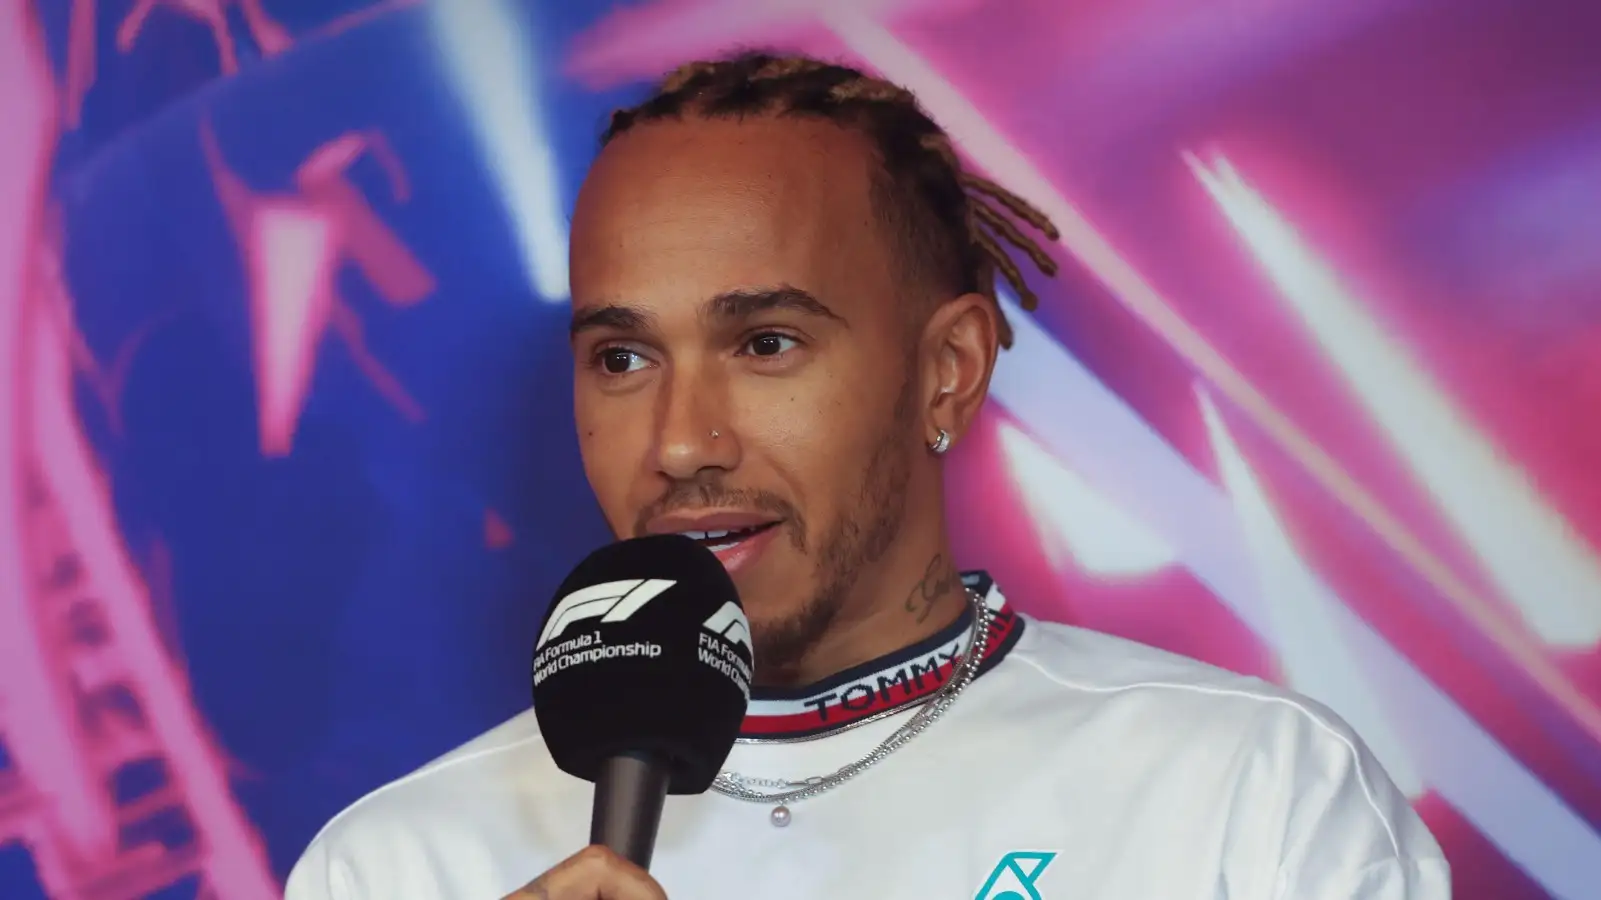 Lewis Hamilton at Canadian GP press conference. Montreal June 2022.